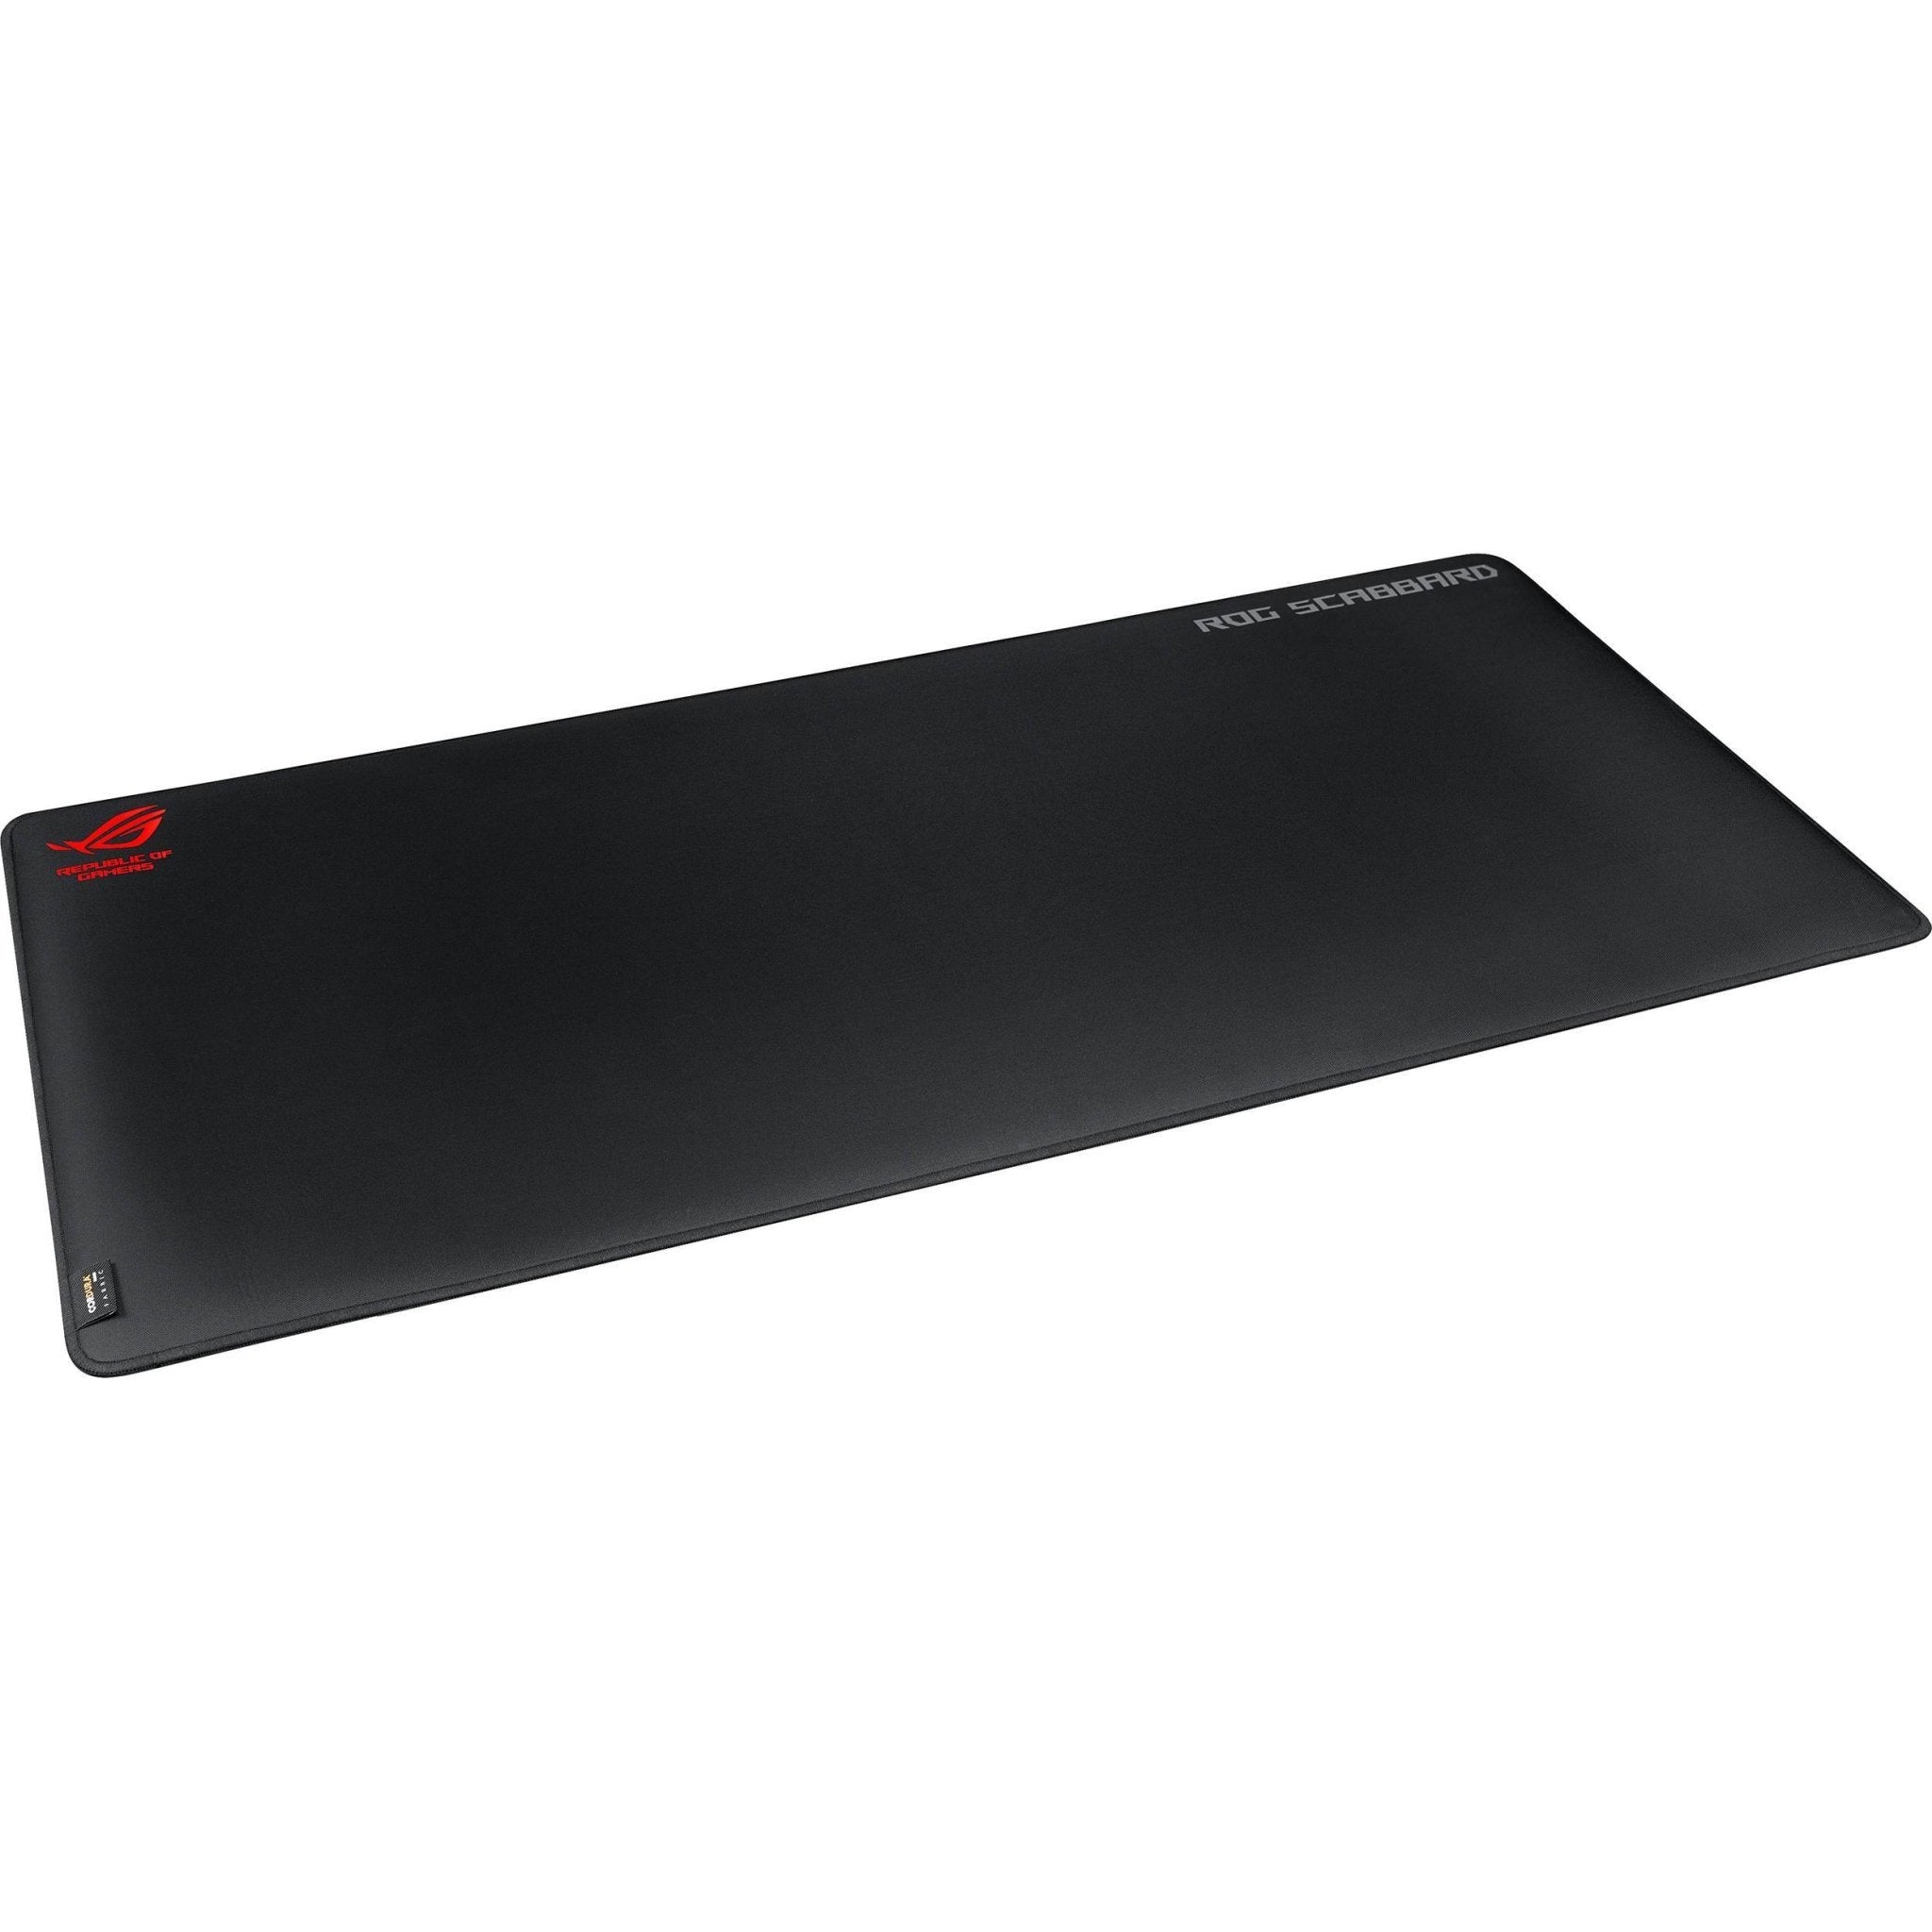 Asus ROG Scabbard Extended Gaming Mouse Pad - Store 974 | ستور ٩٧٤